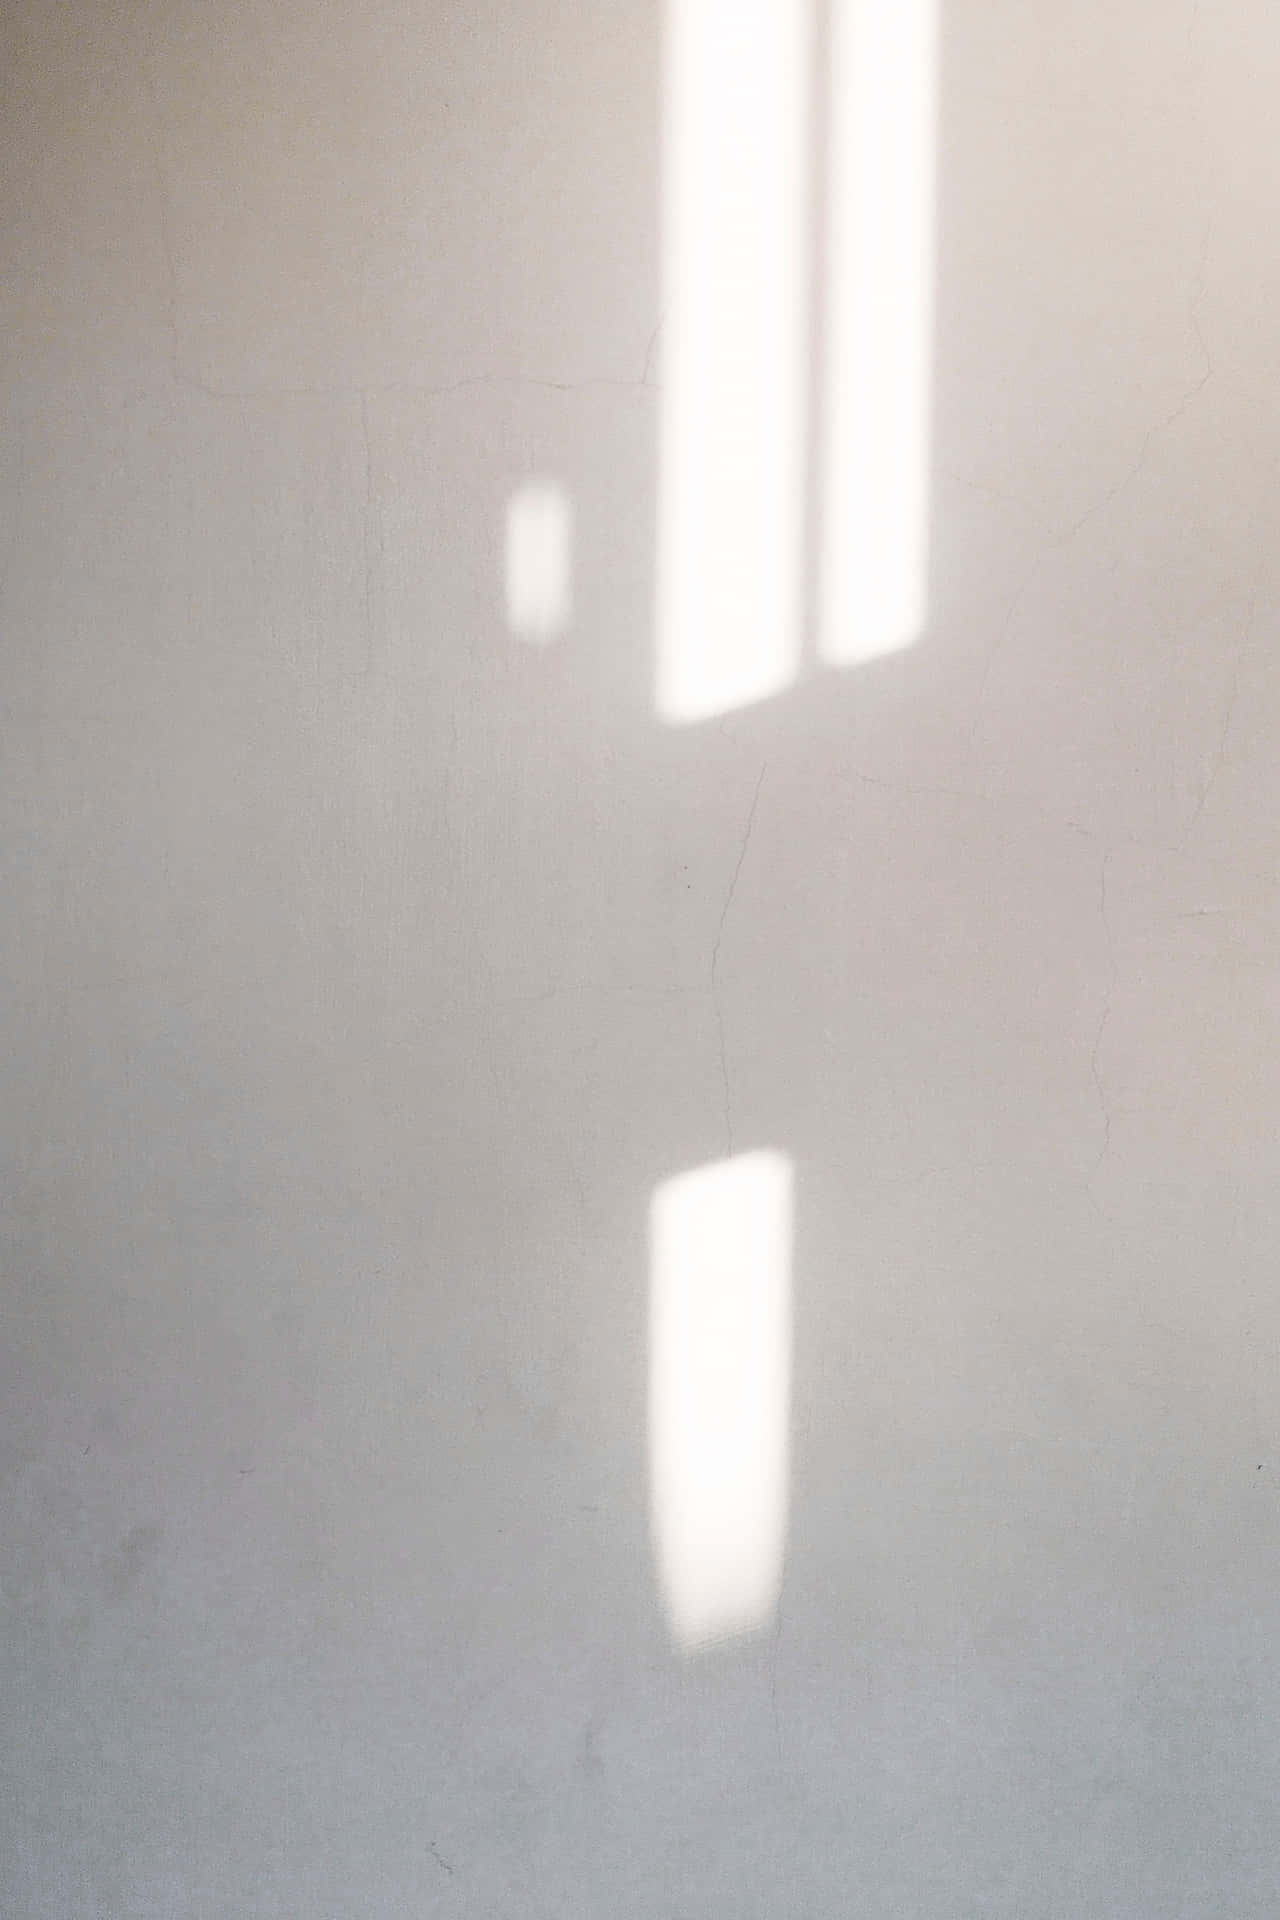 White Wall Background With Sunlight Pattern